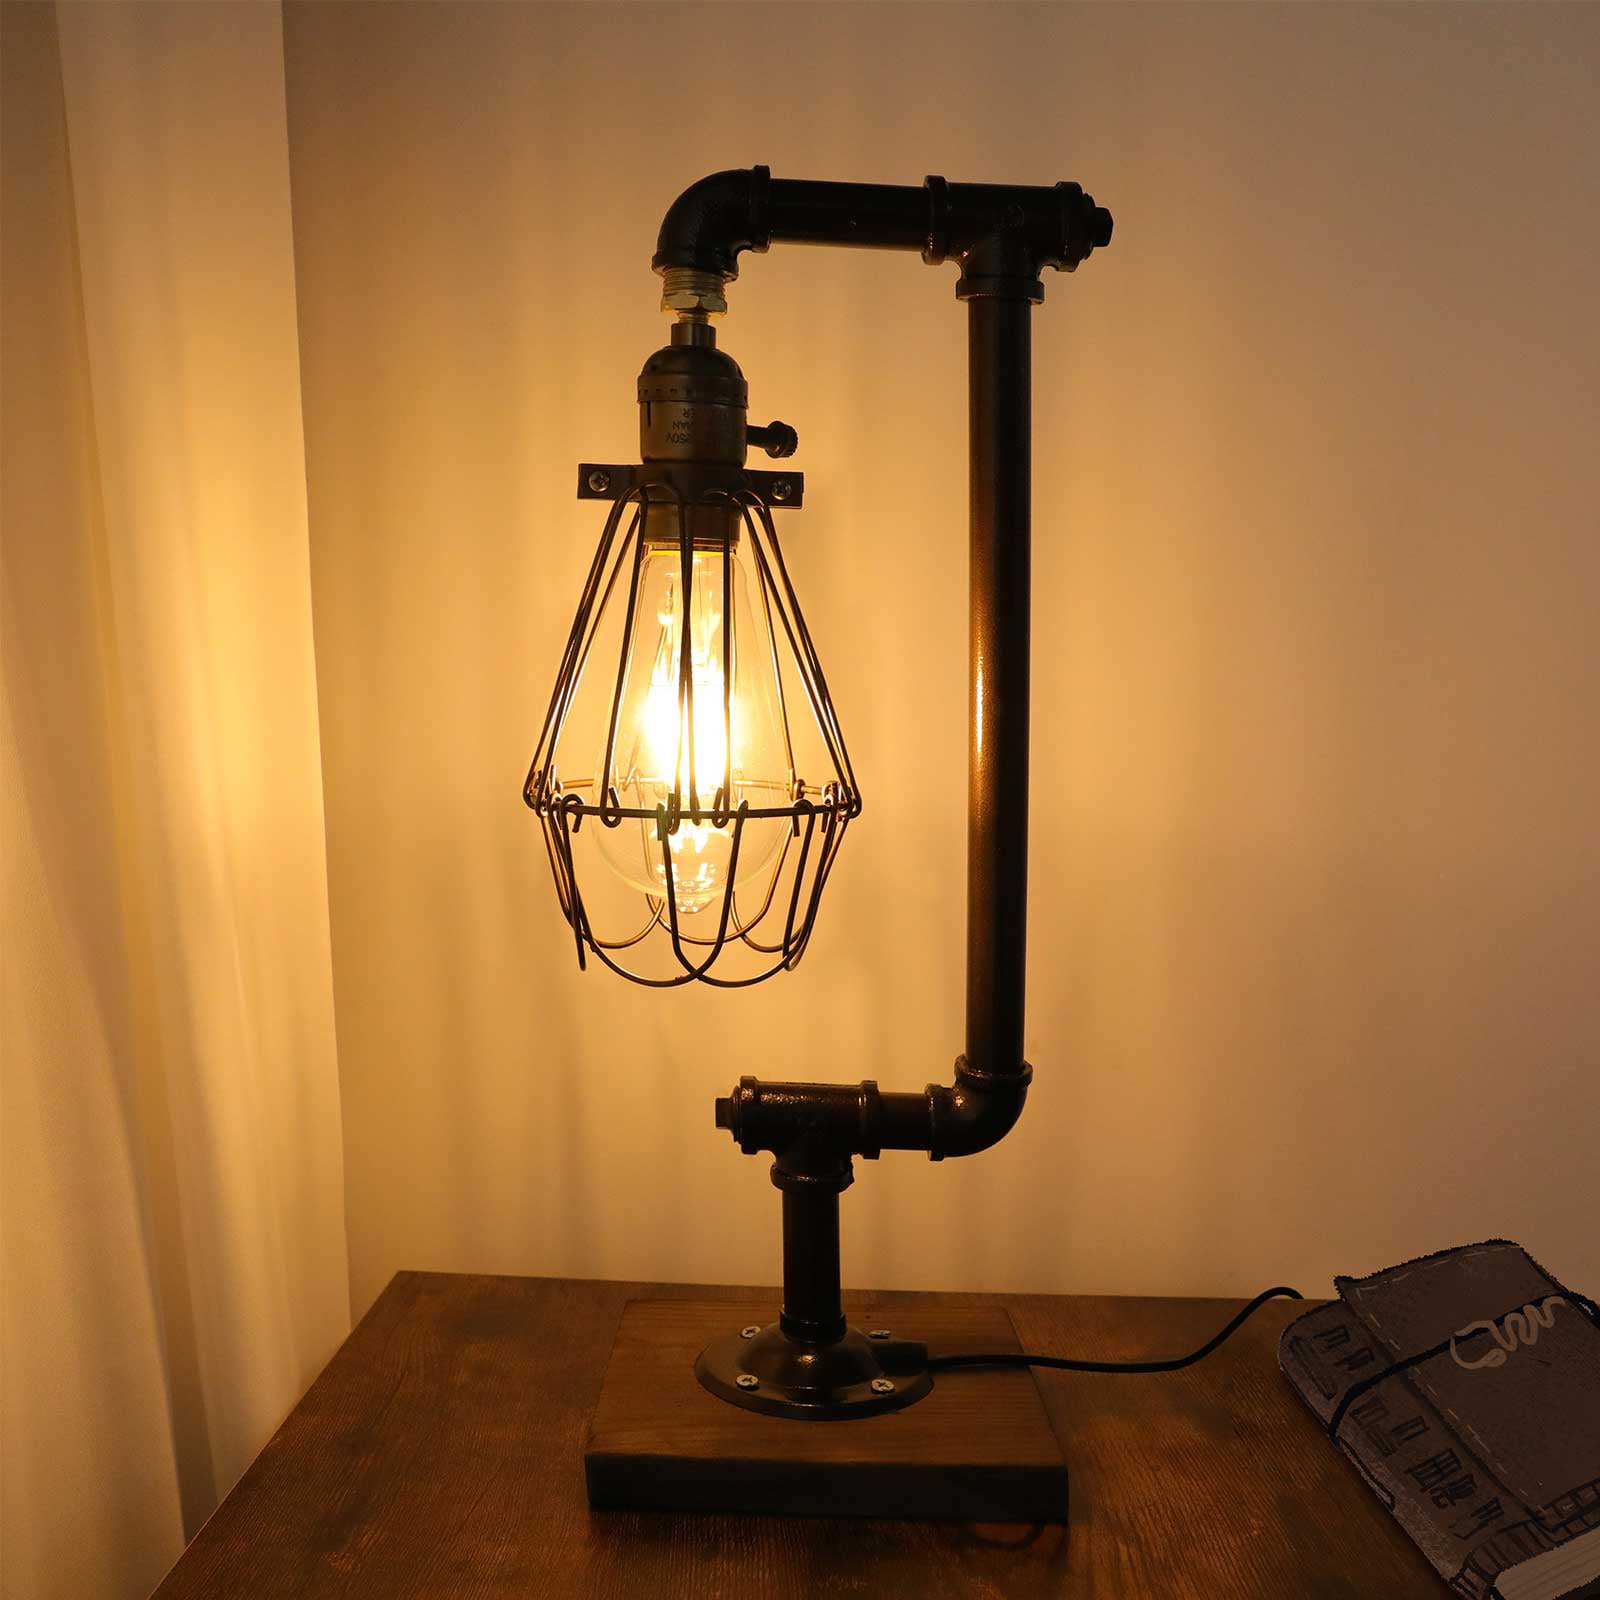 INDUSTRIAL RETRO STYLE WIRE CAGE MESH DESK BEDROOM TABLE LAMP LIVING ROOM FUNKY 